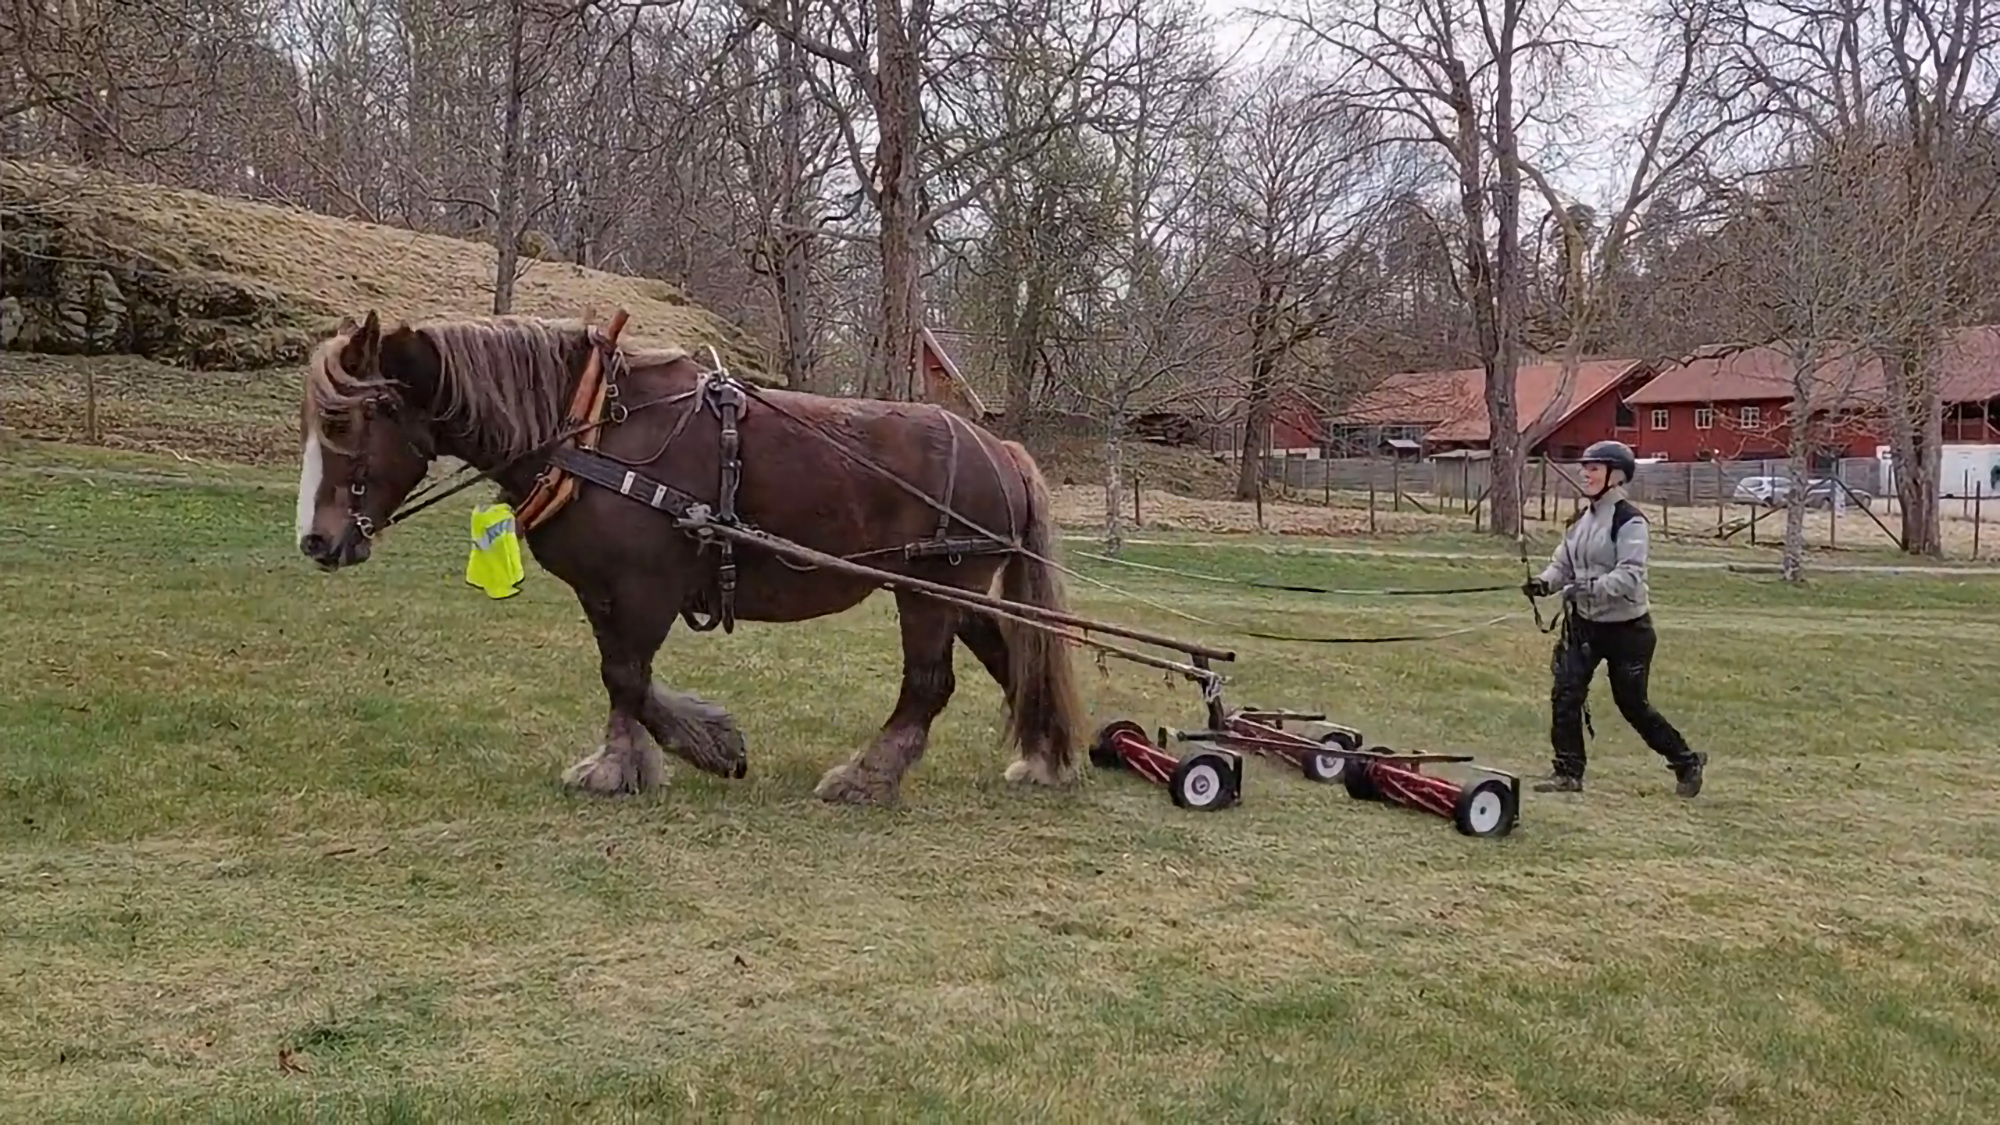 MOWING THE GRASS AND COMPLETING THE HORSE STABLE